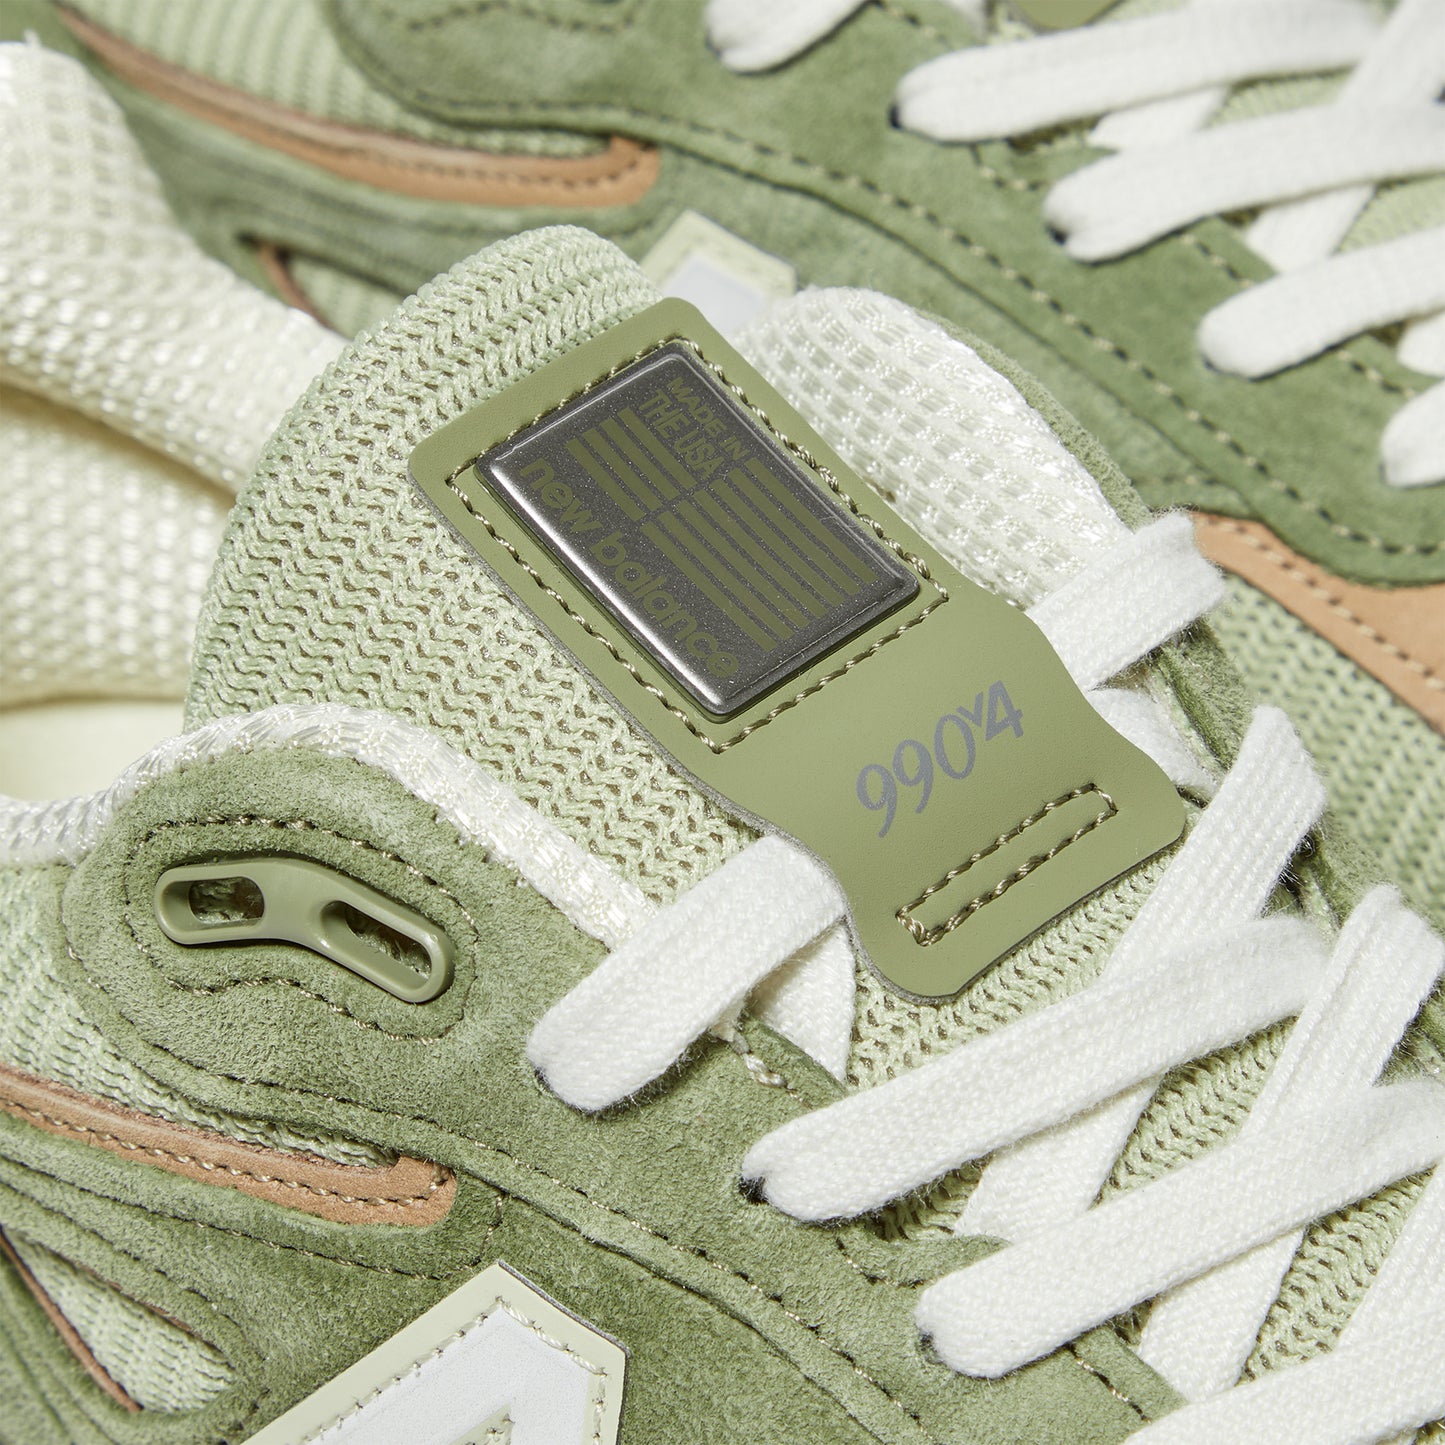 New Balance Made in USA 990v4 (Olive)